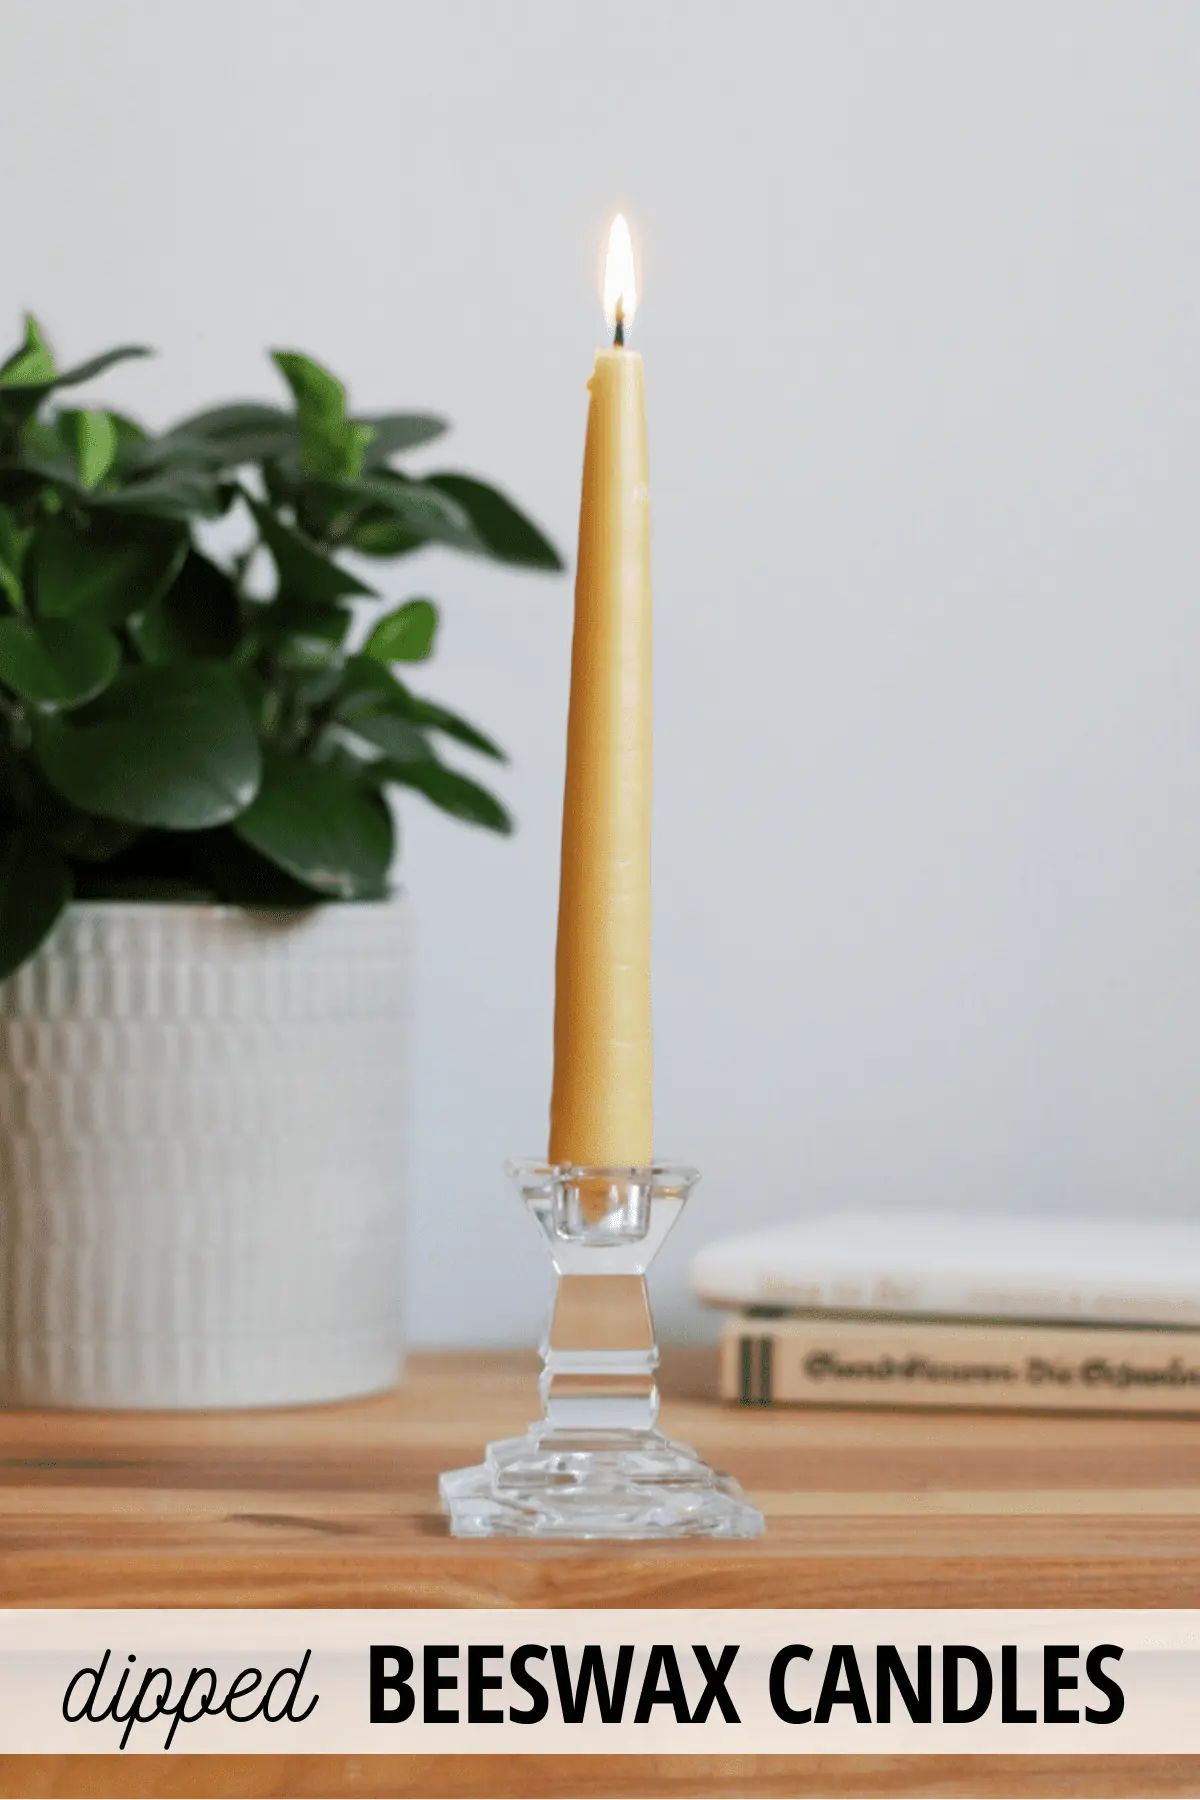 one burning beeswax taper candle